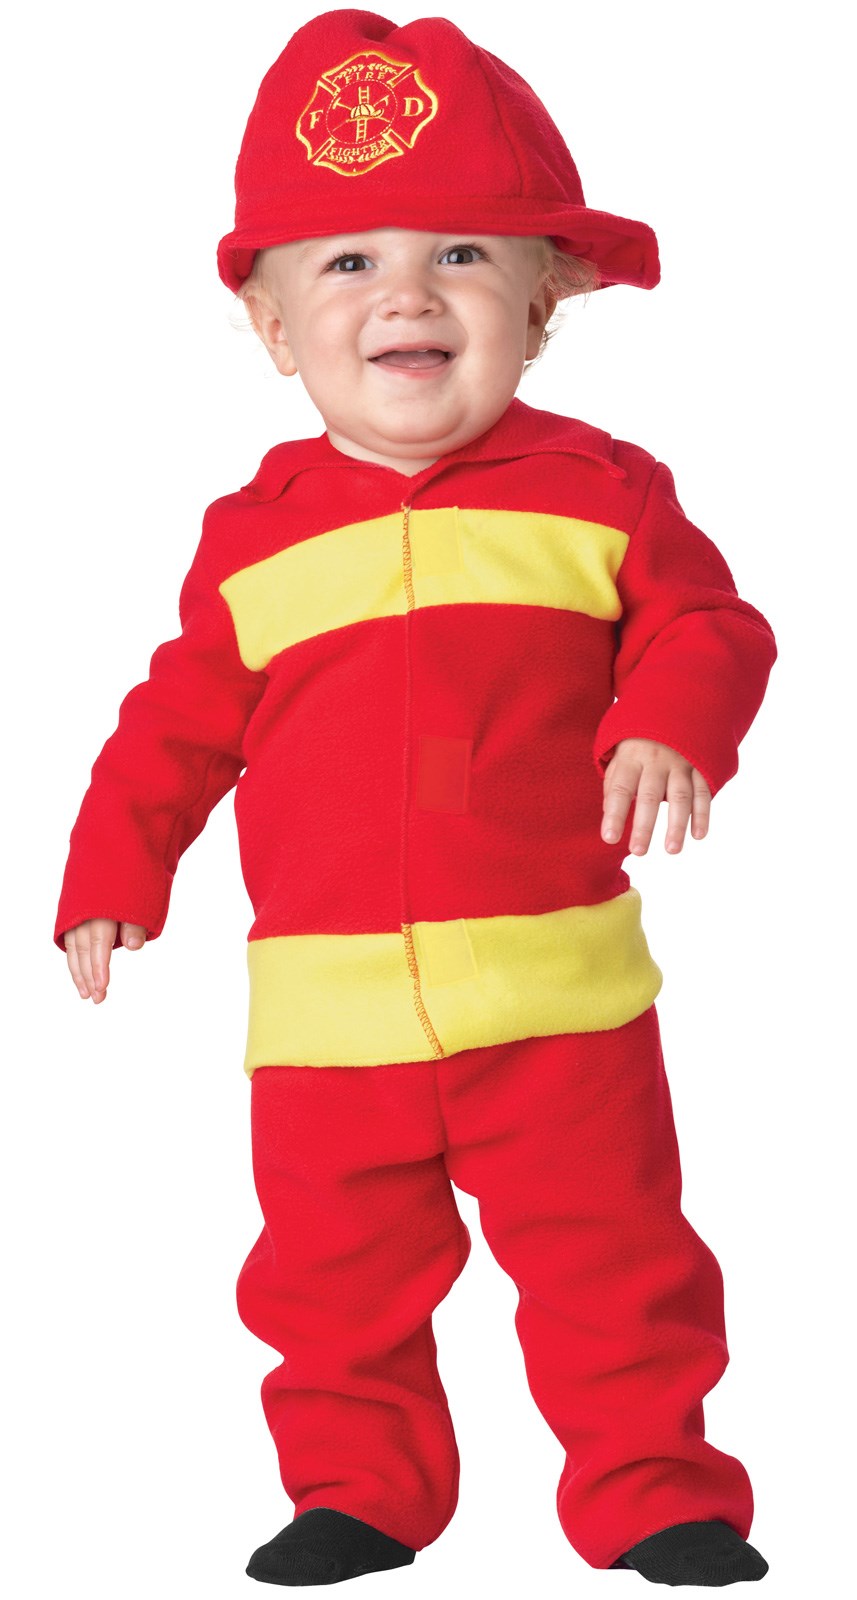 Fire Fighter Infant Costume